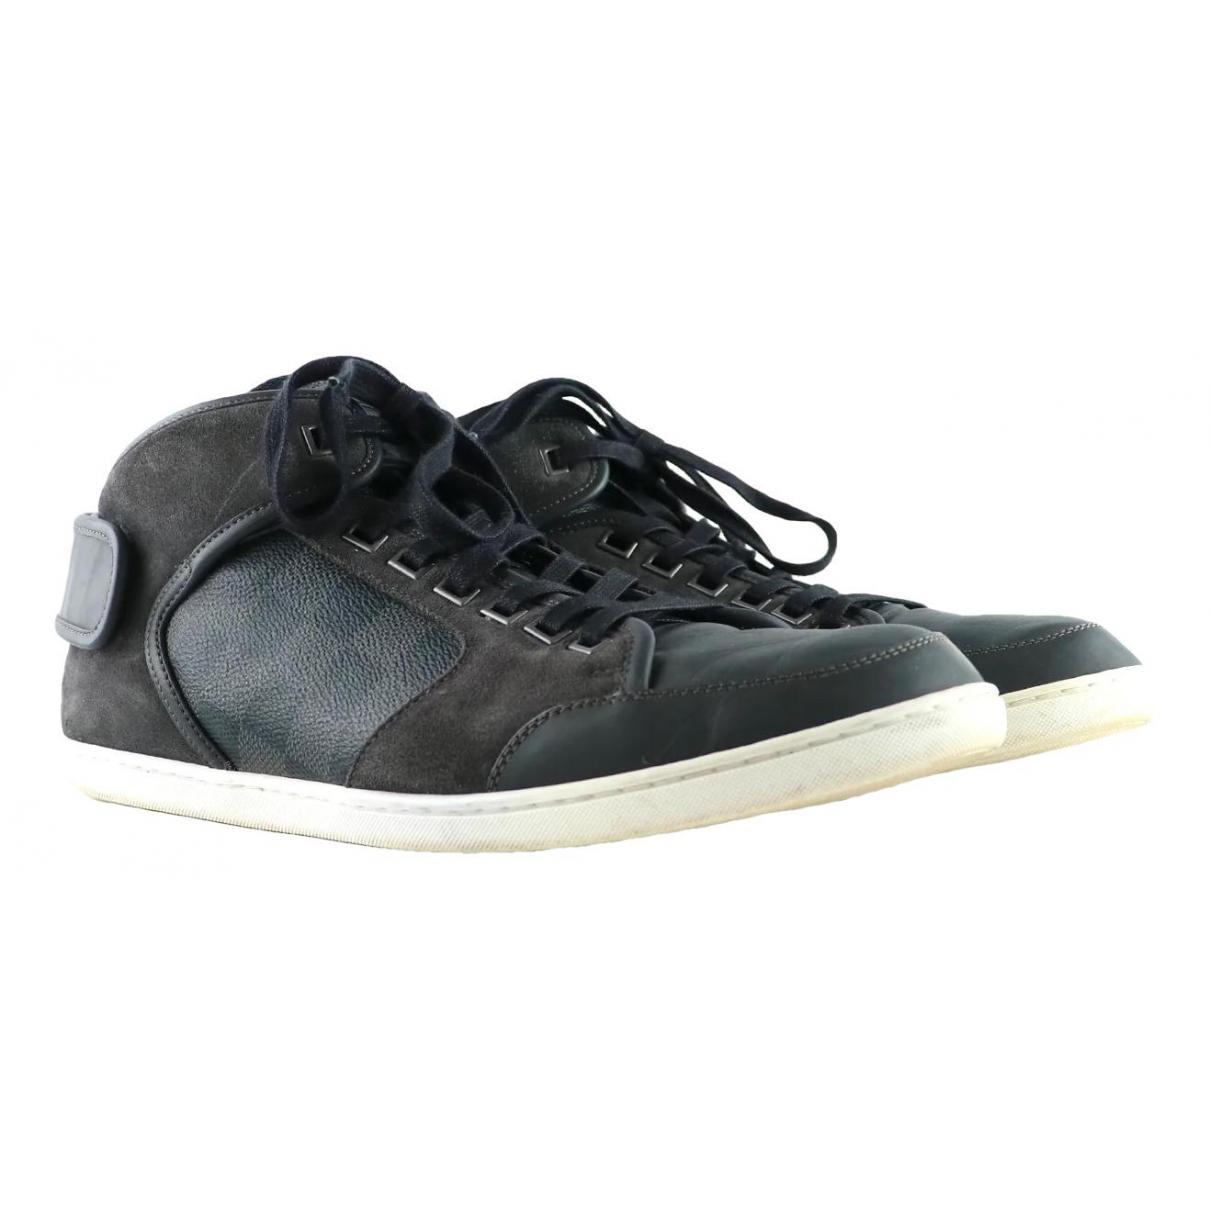 Louis Vuitton Shoes  Buy or Sell LV shoes for men - Vestiaire Collective